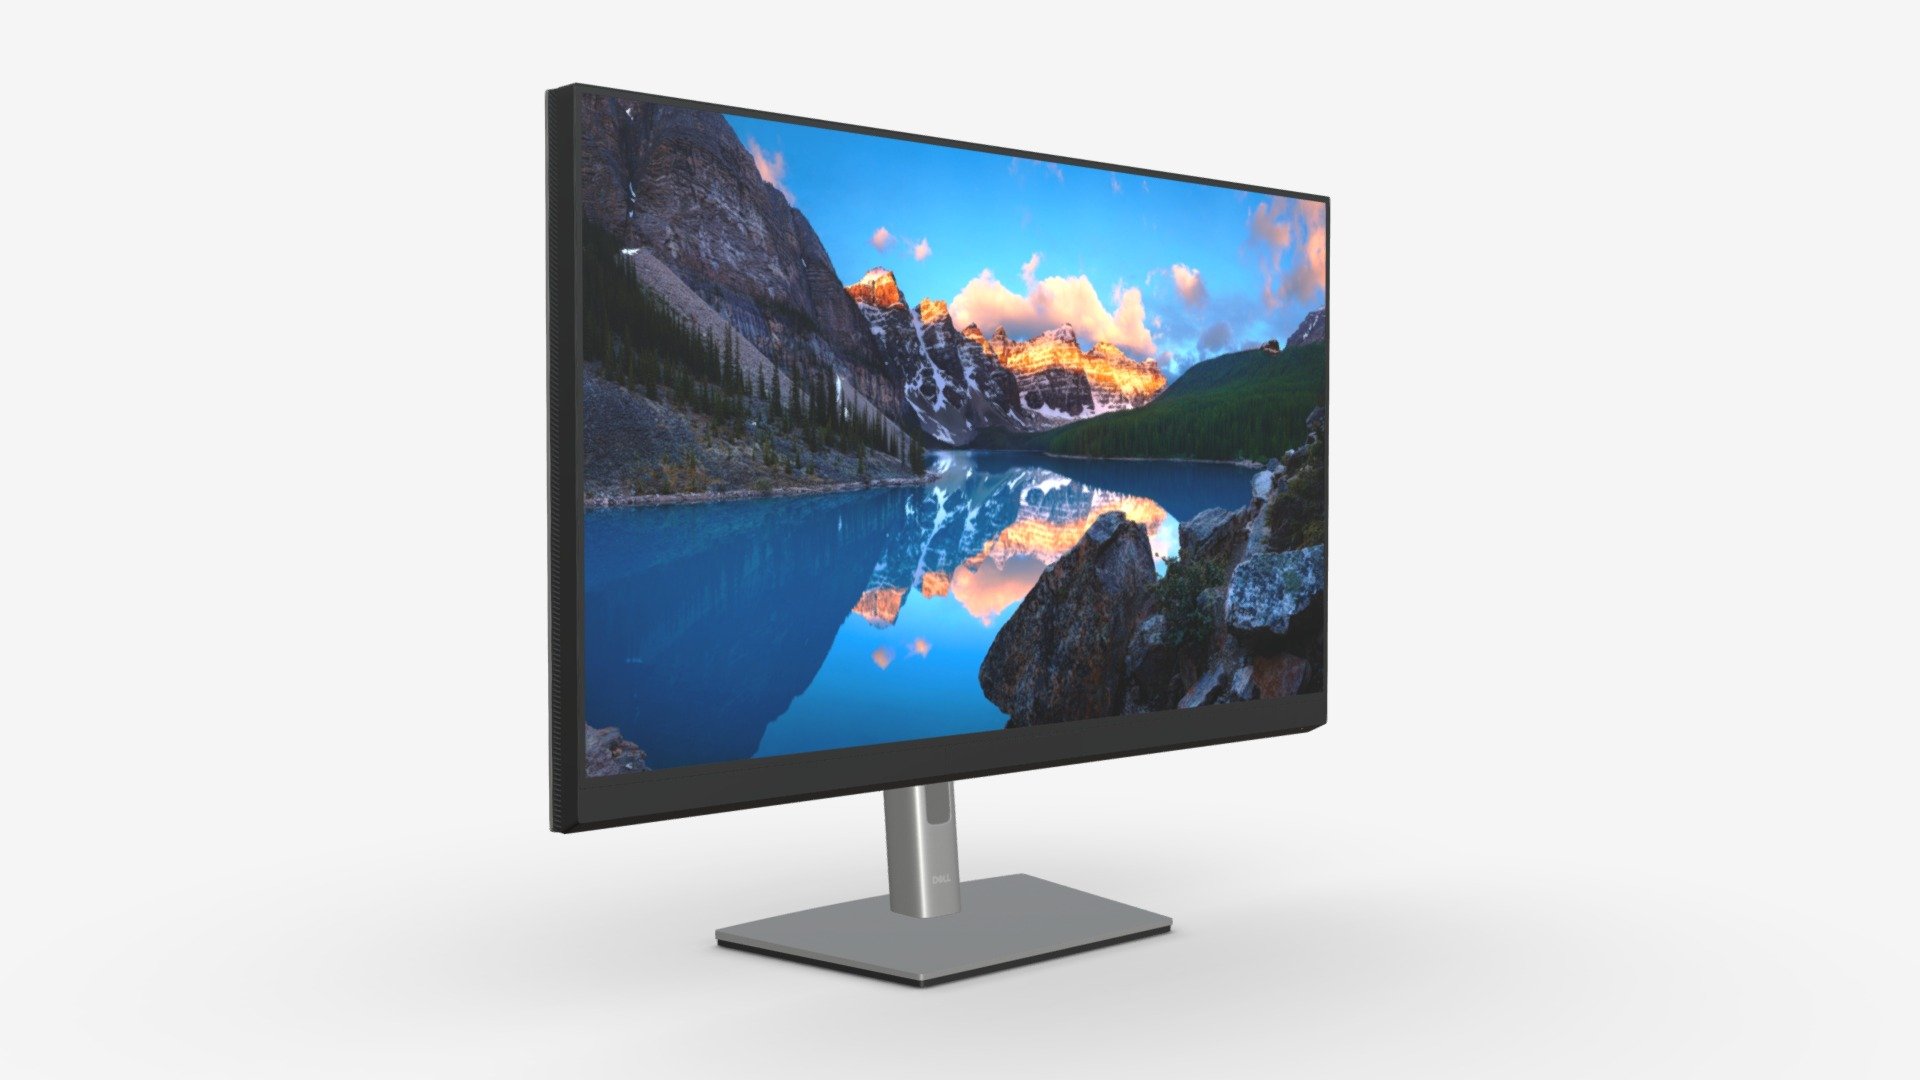 Dell UltraSharp LCD 32 inch monitor - Buy Royalty Free 3D model by HQ3DMOD (@AivisAstics) 3d model